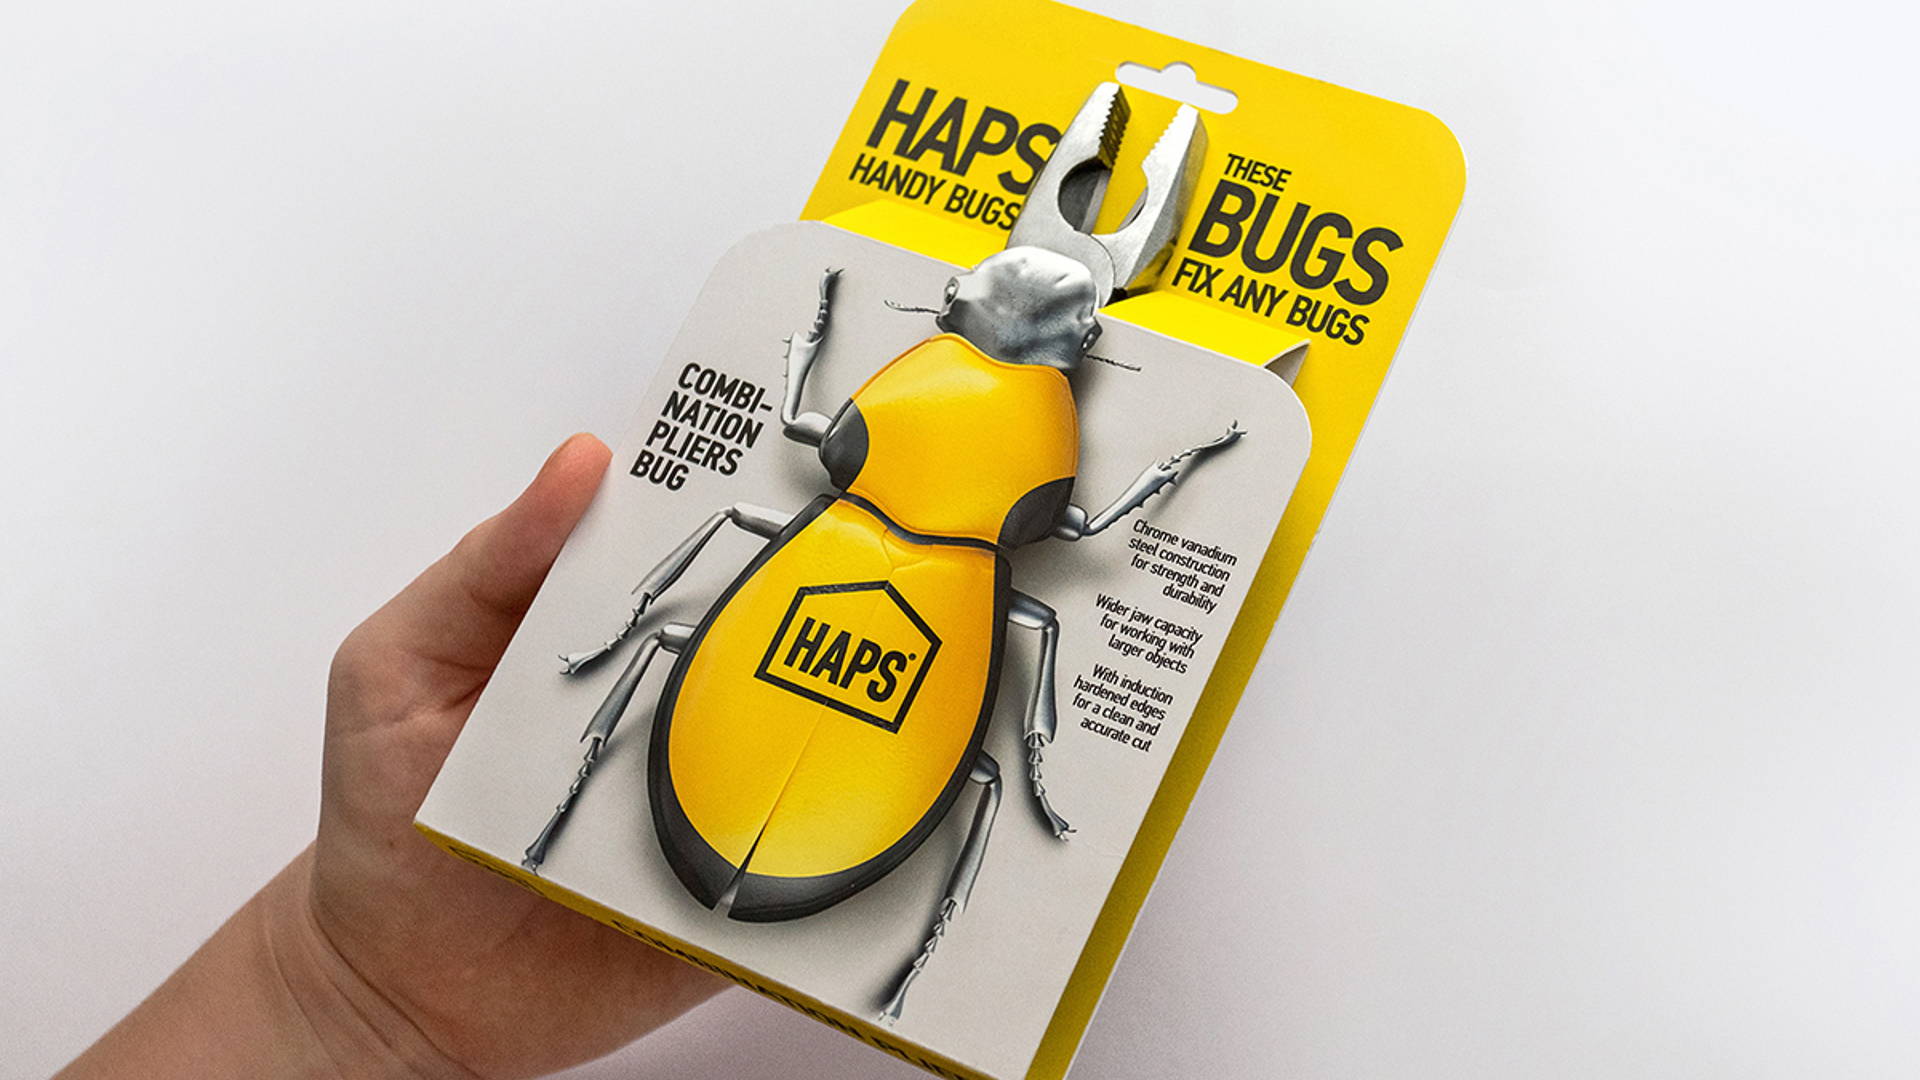 Featured image for HAPS Handy Bugs Make For a Clever Concept